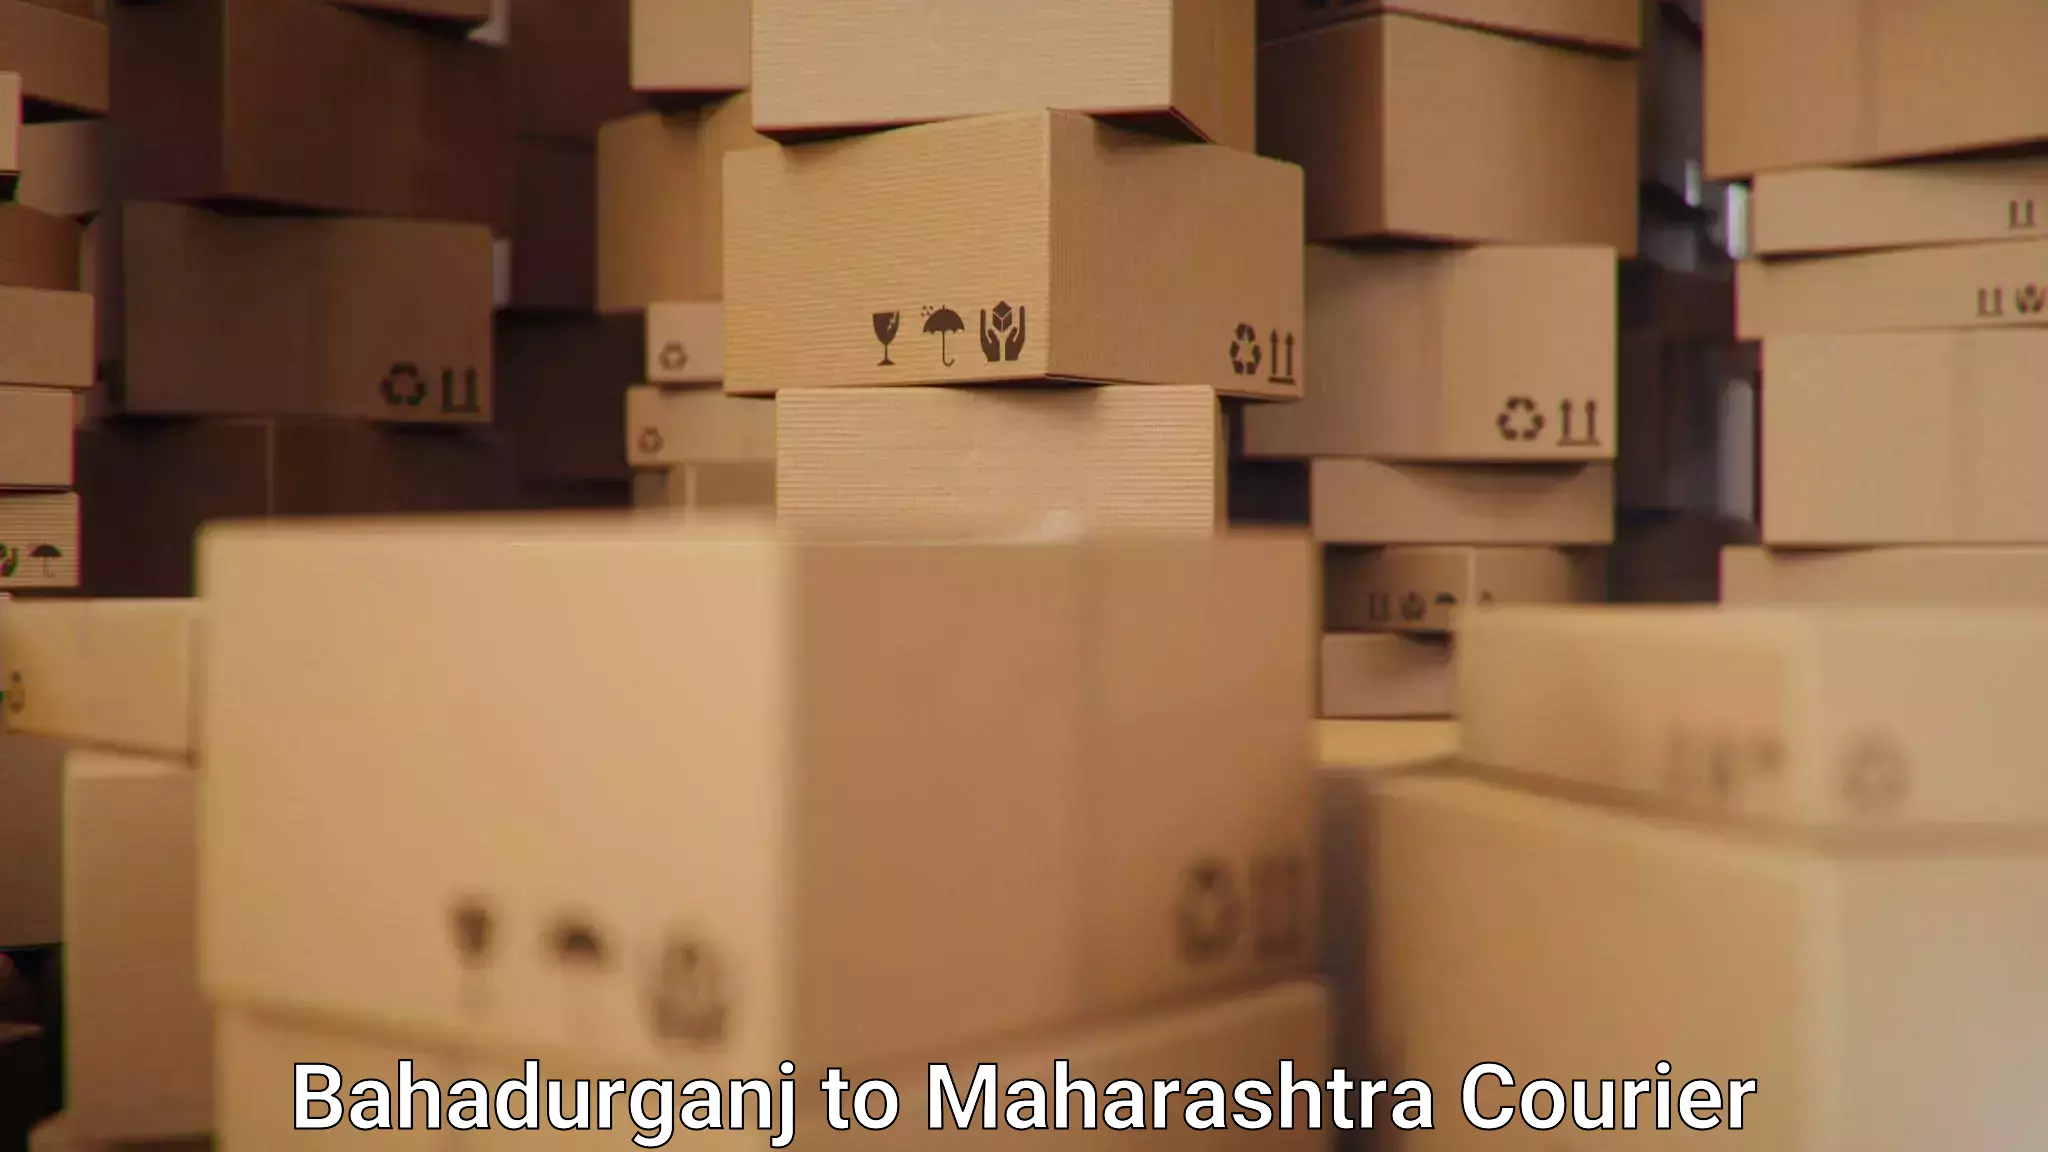 Reliable courier services in Bahadurganj to Palghar